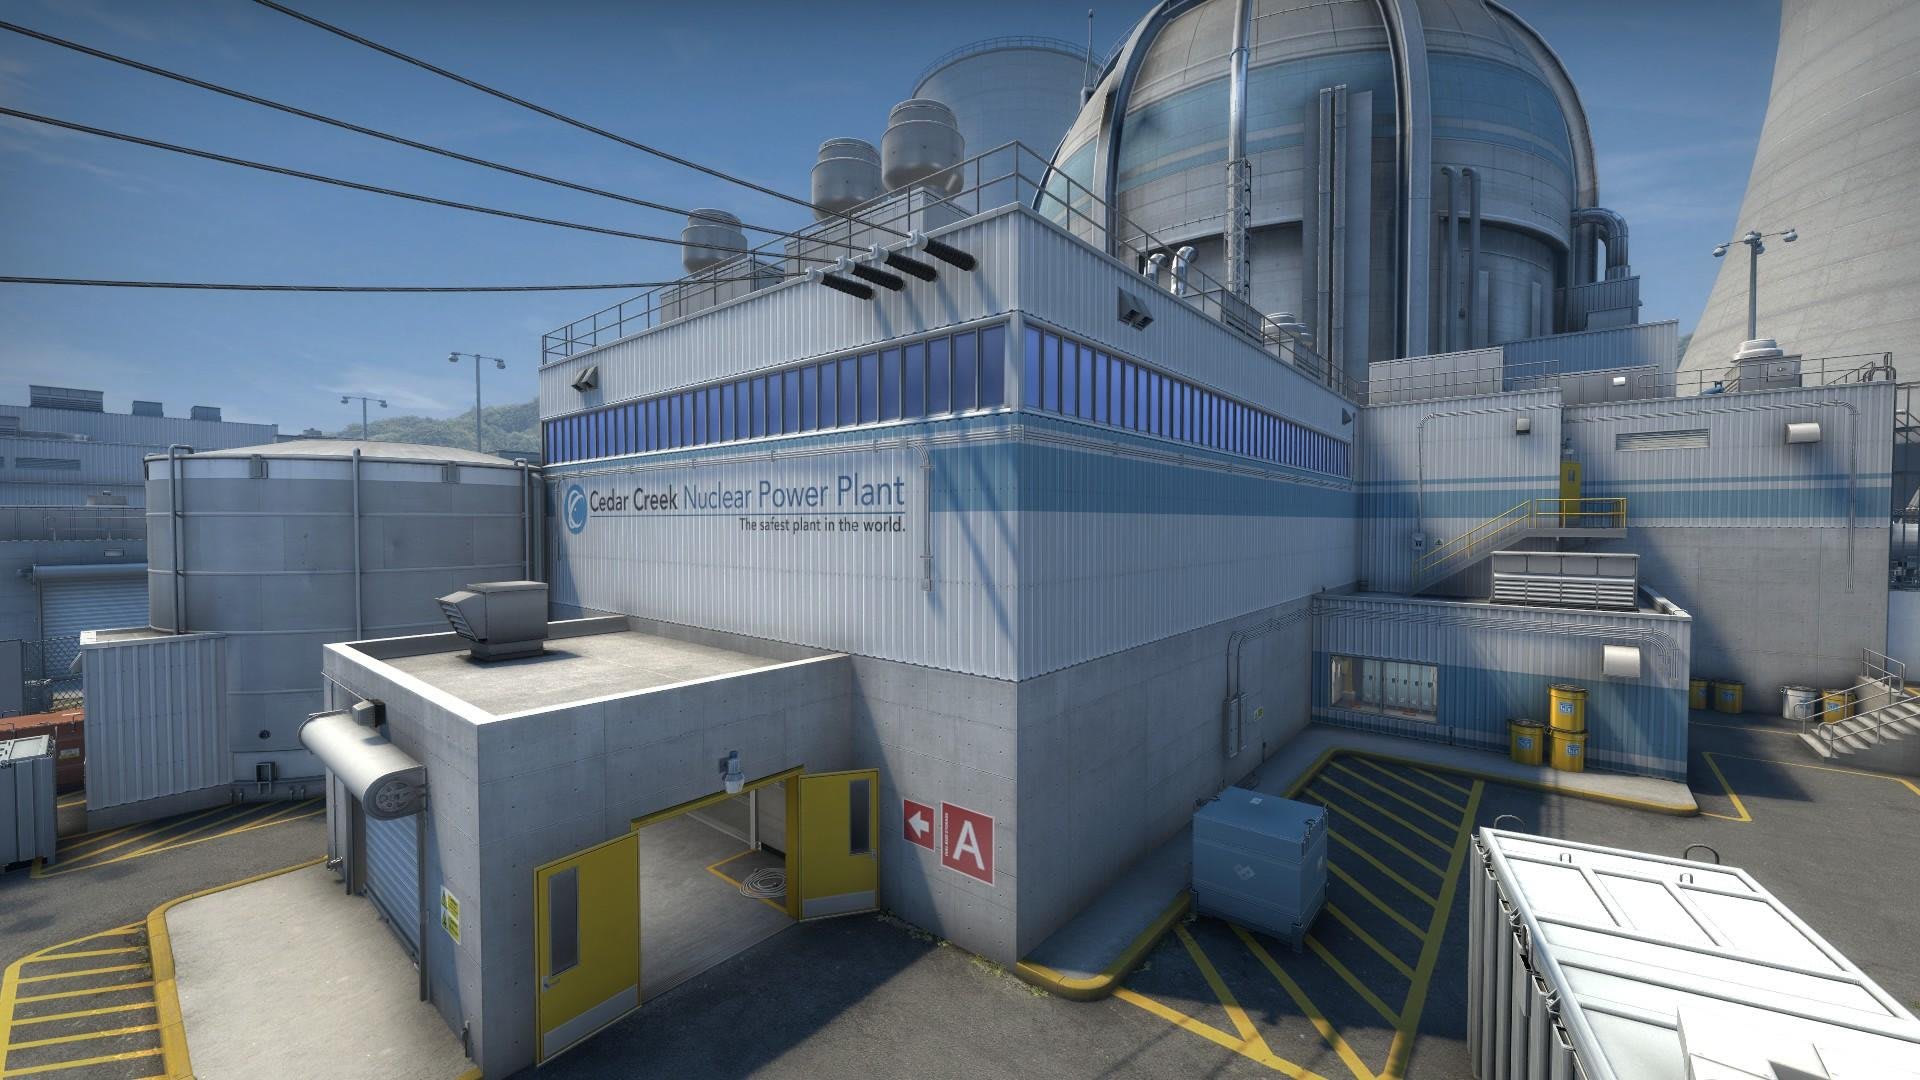 børn tyran Sind Discover CS:GO's new look Nuke: What you need to know